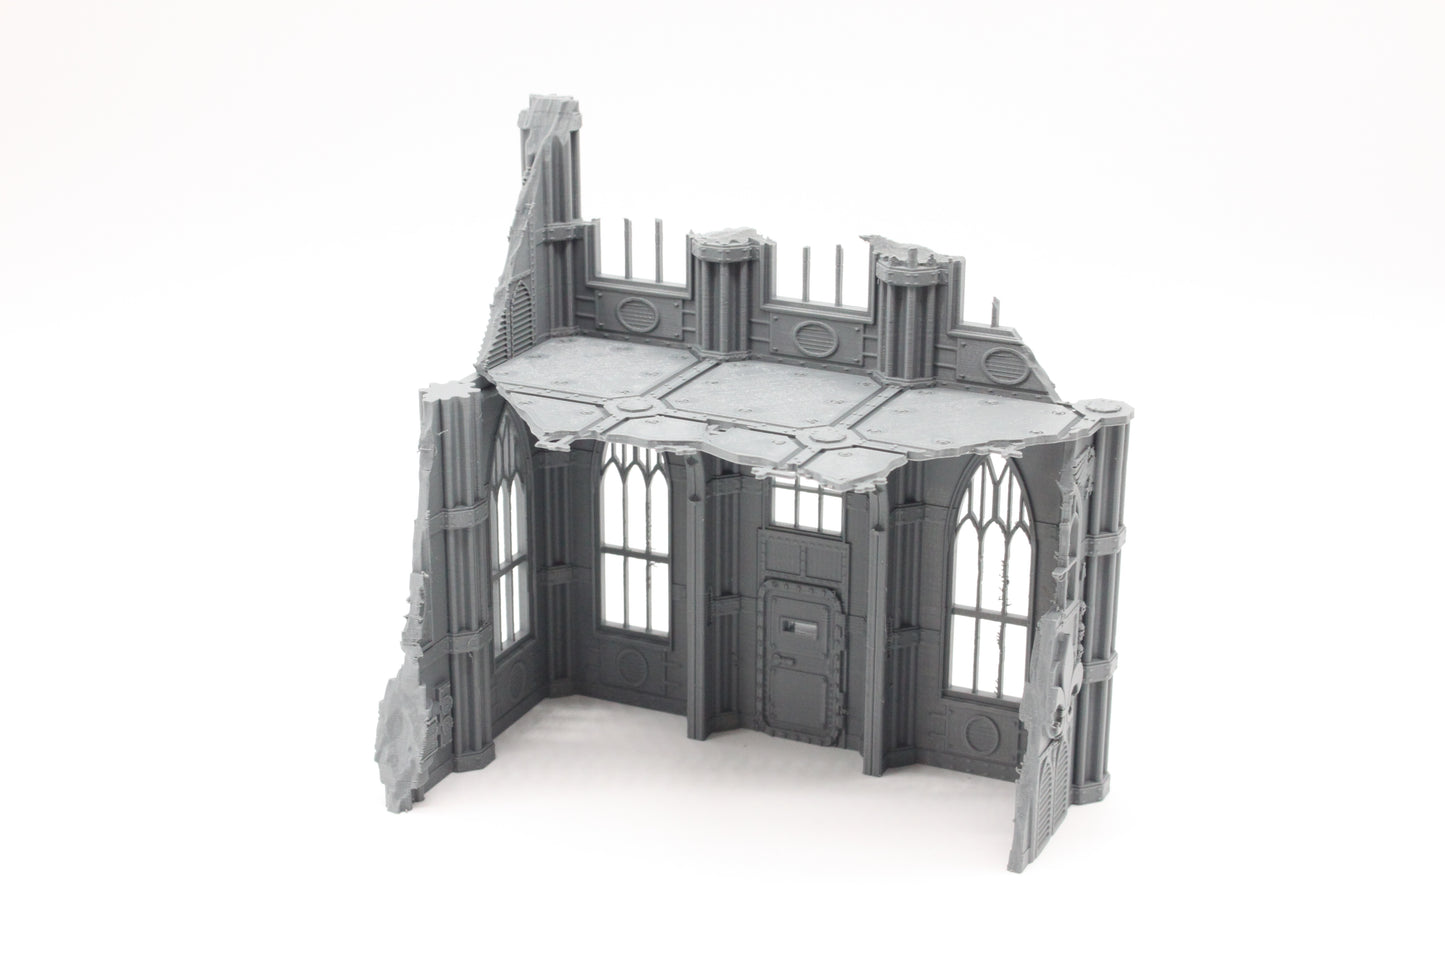 Detailed C Shaped Two Level Gothic Ruined Building